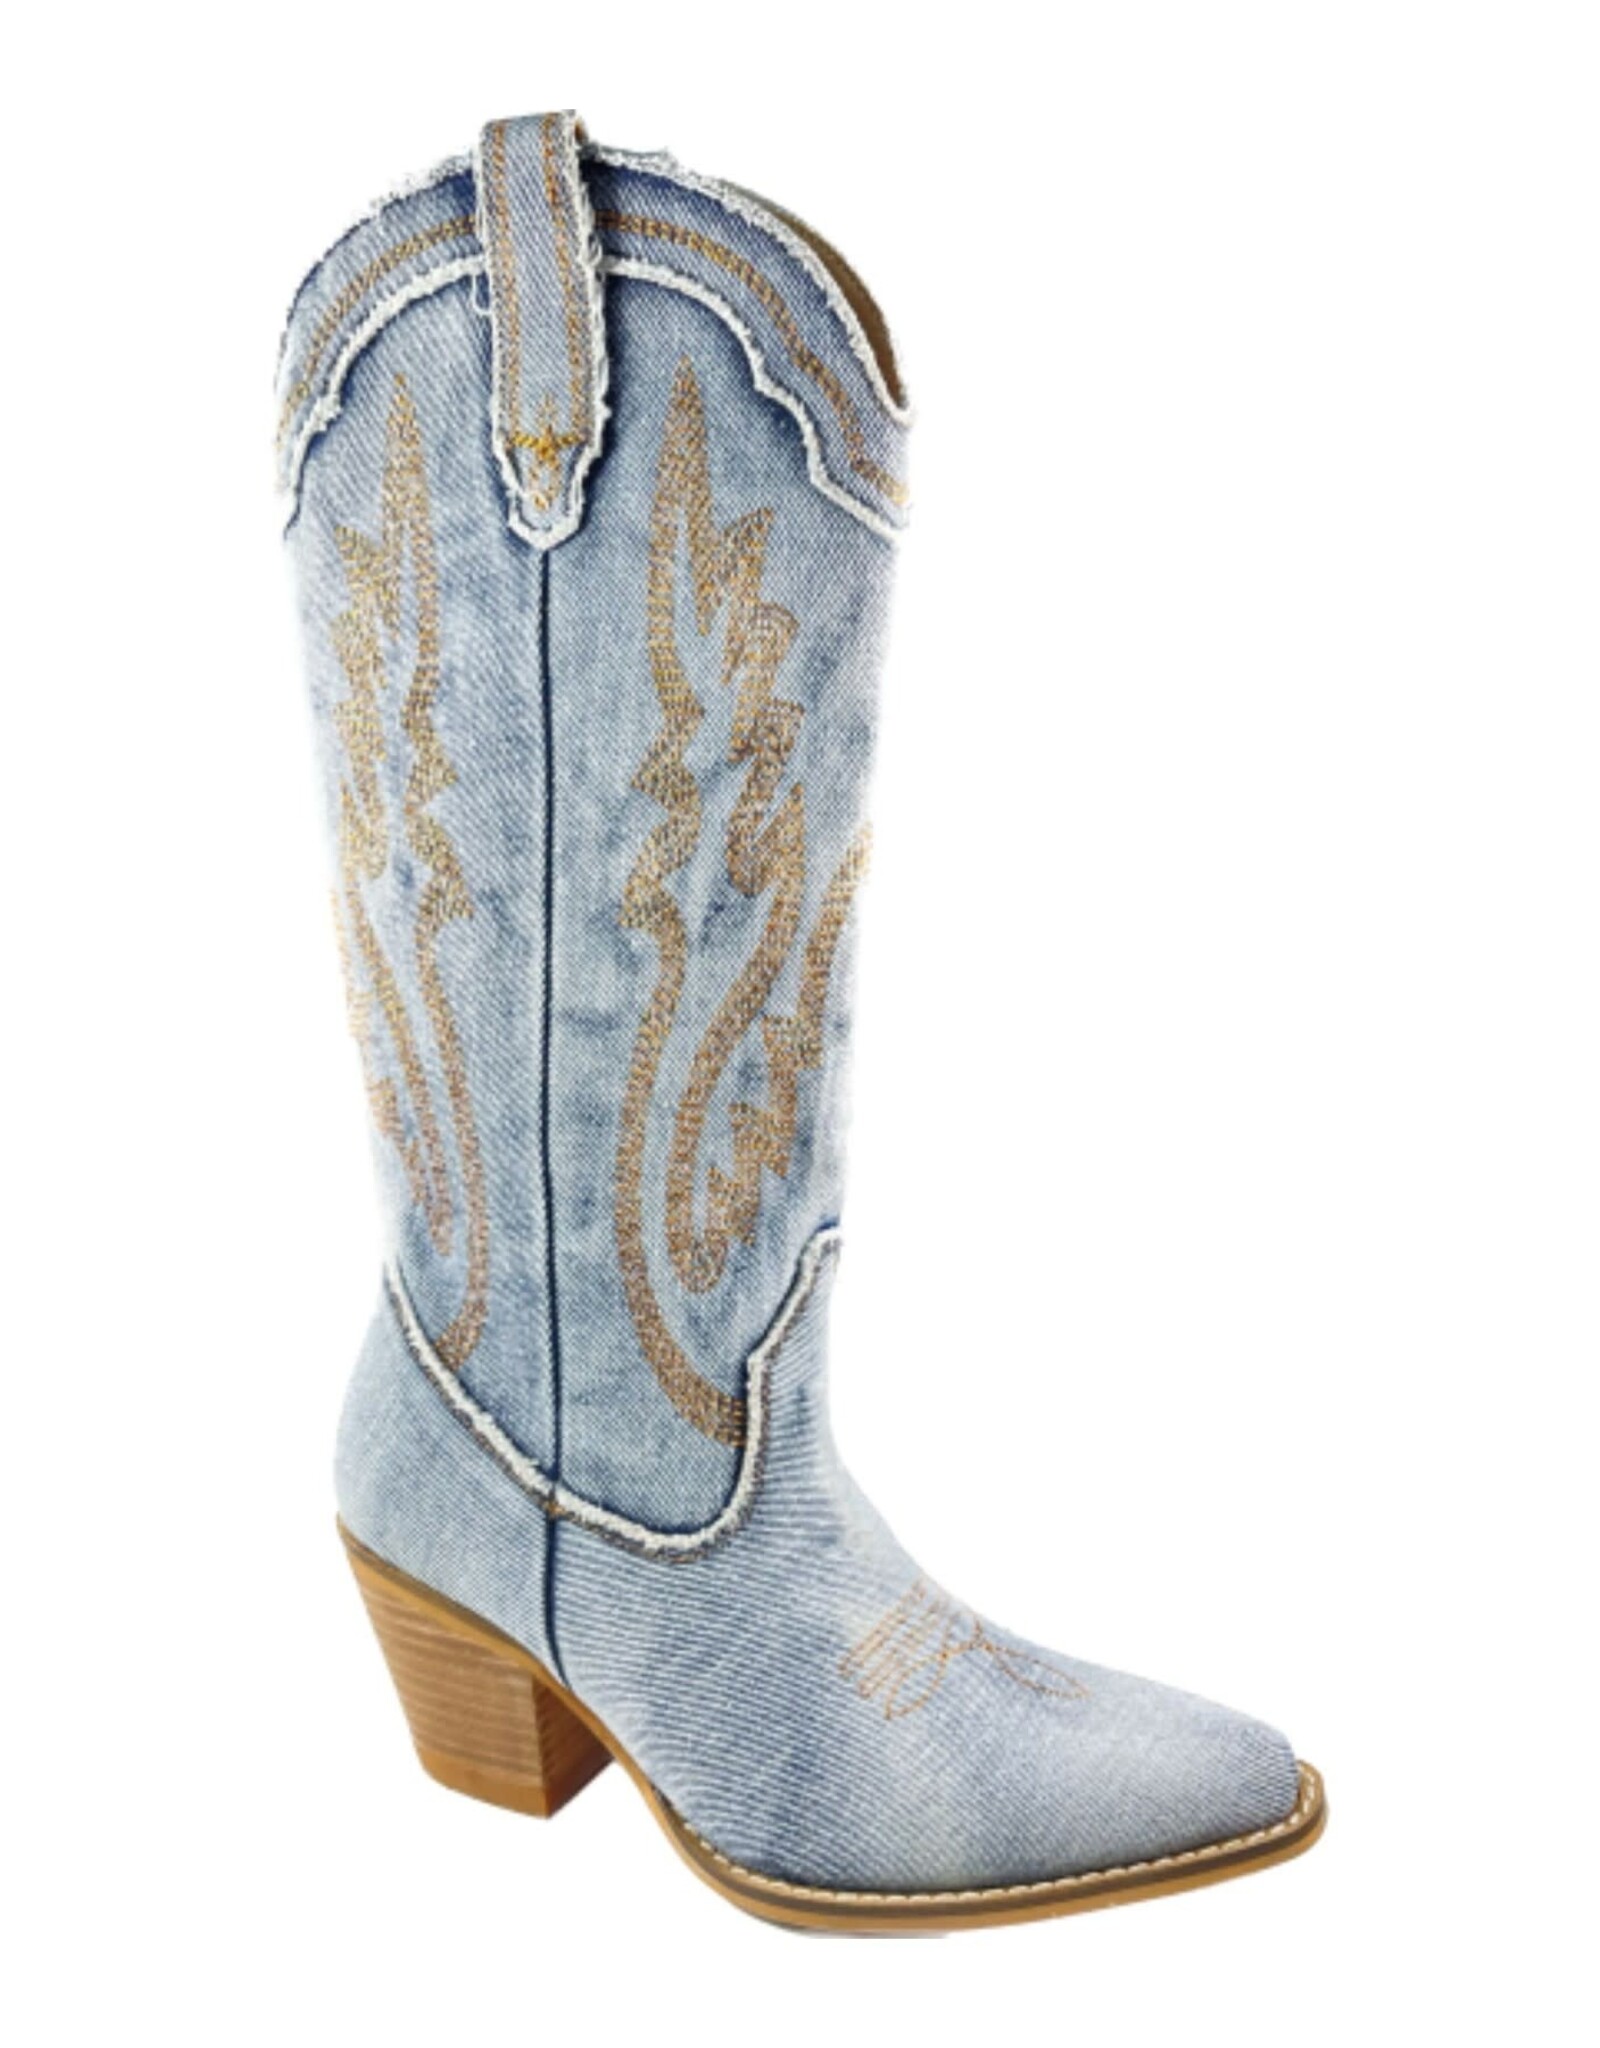 Let's See Style Denim western boot